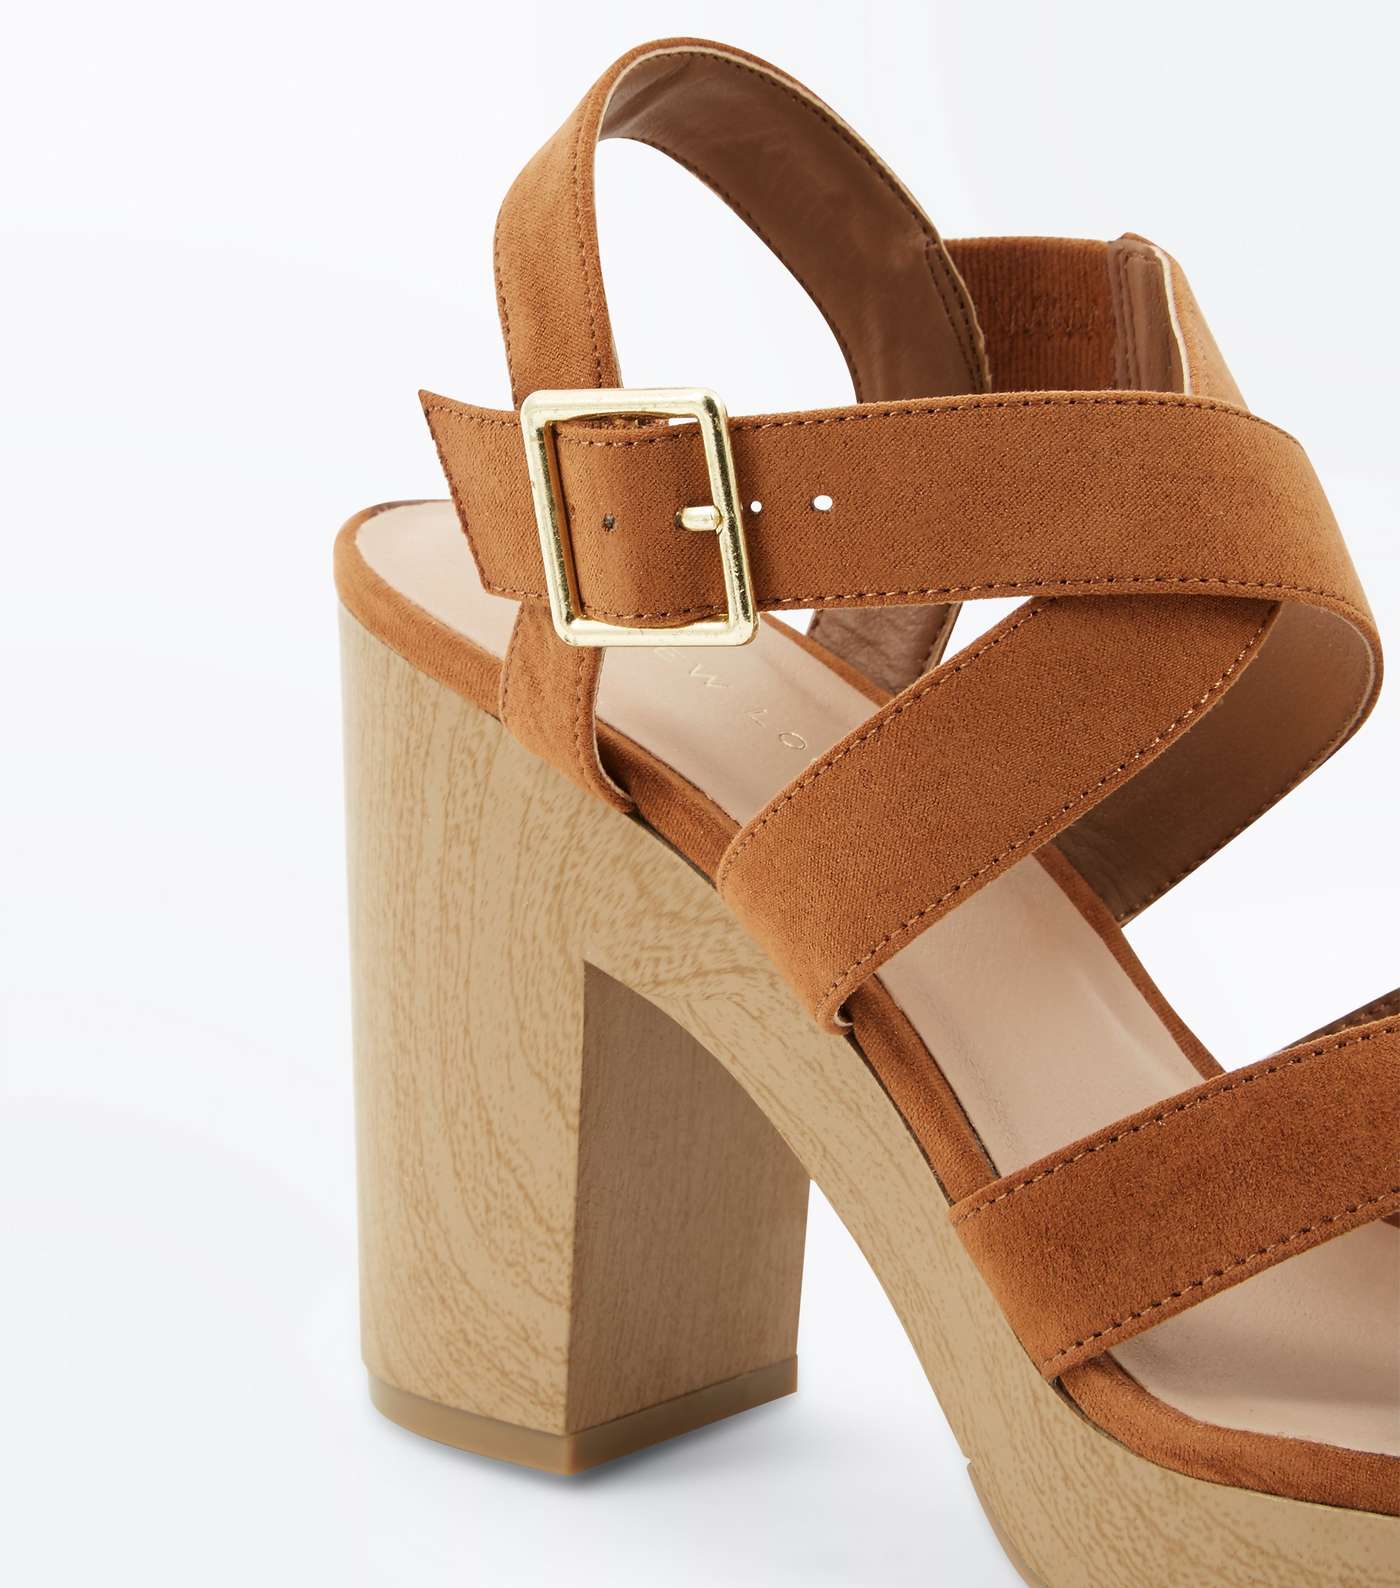 Tan Suedette Strappy Wooden Sole Sandals Image 4